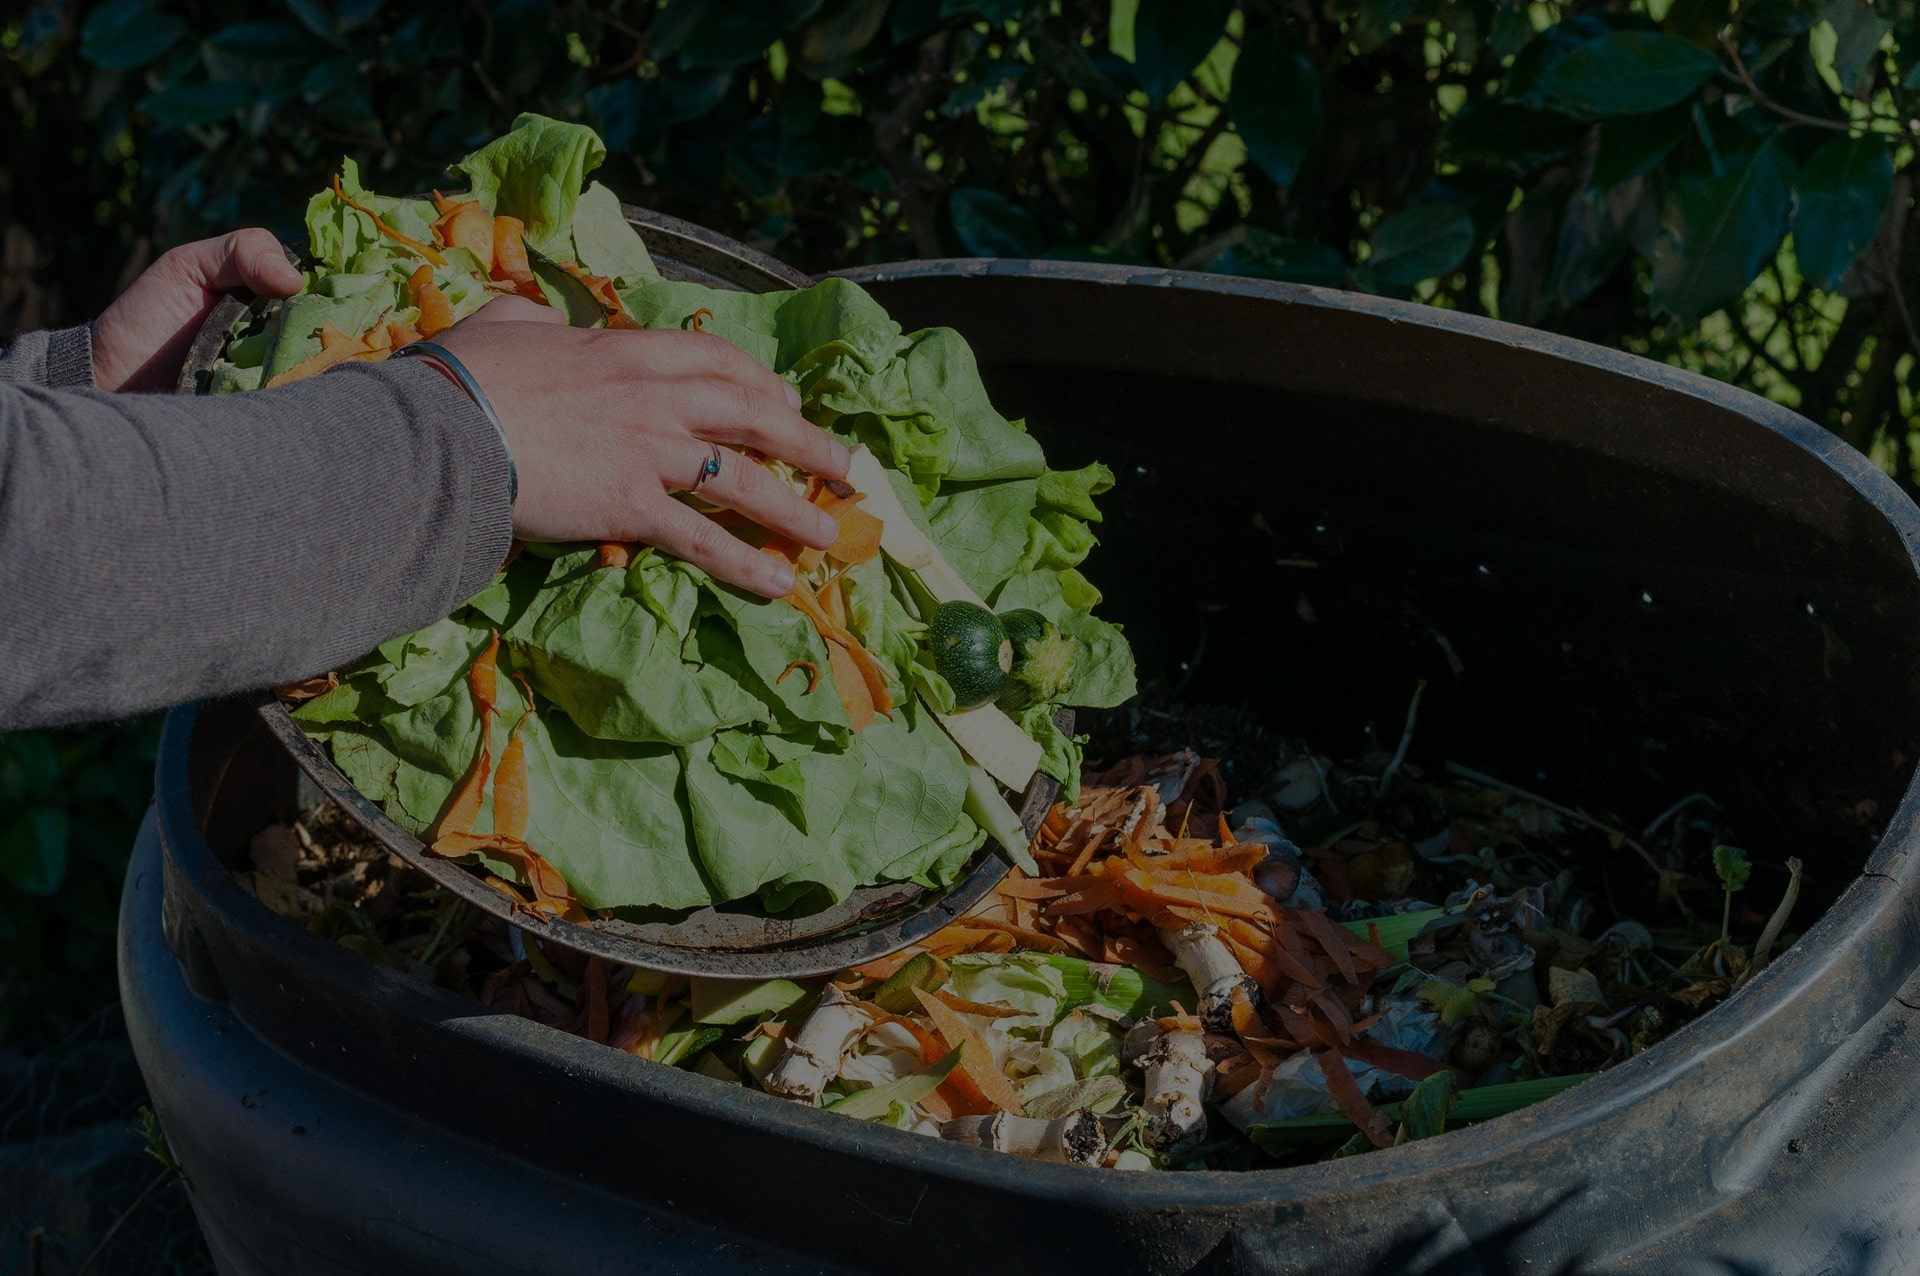 How Florida’s Government is Addressing Commercial Food Waste